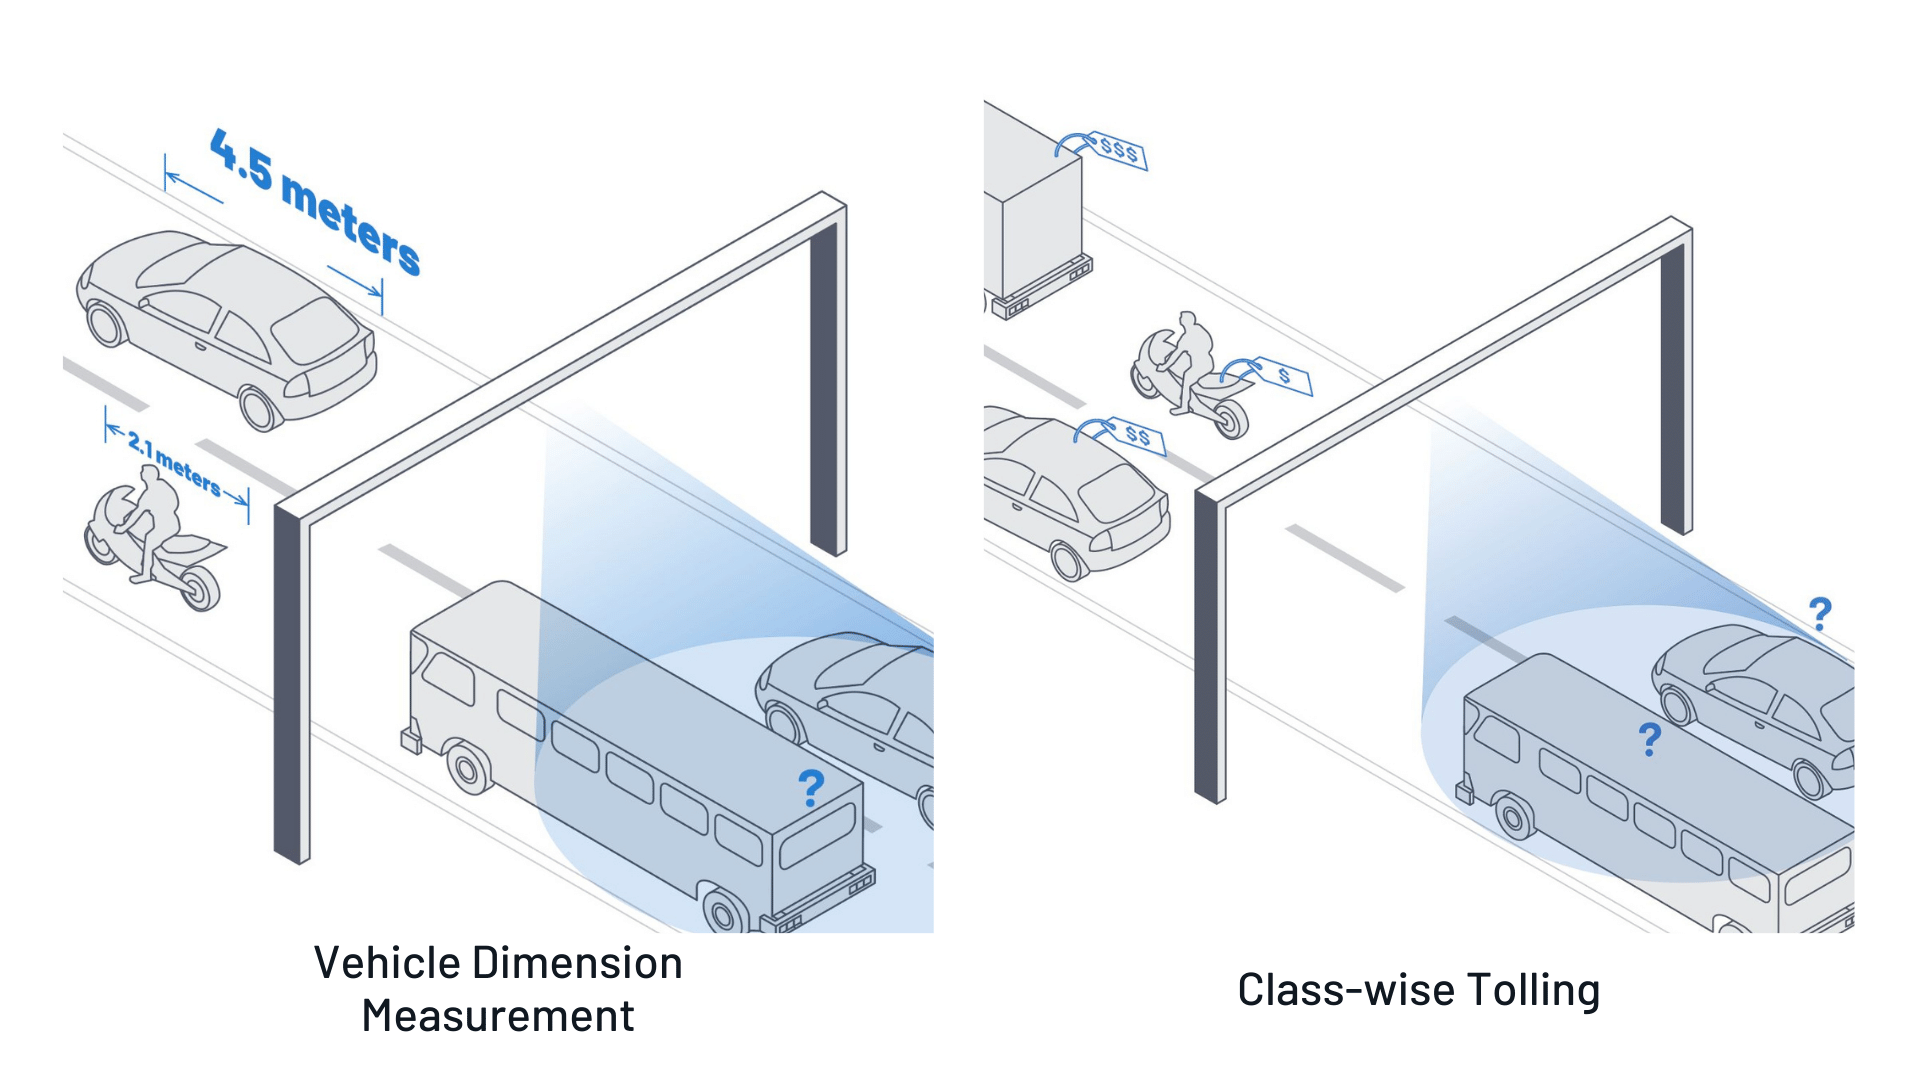 For automatic tolling purposes, liDAR can be used to measure the dimensions of different type of vehicles and do class-wise tolling